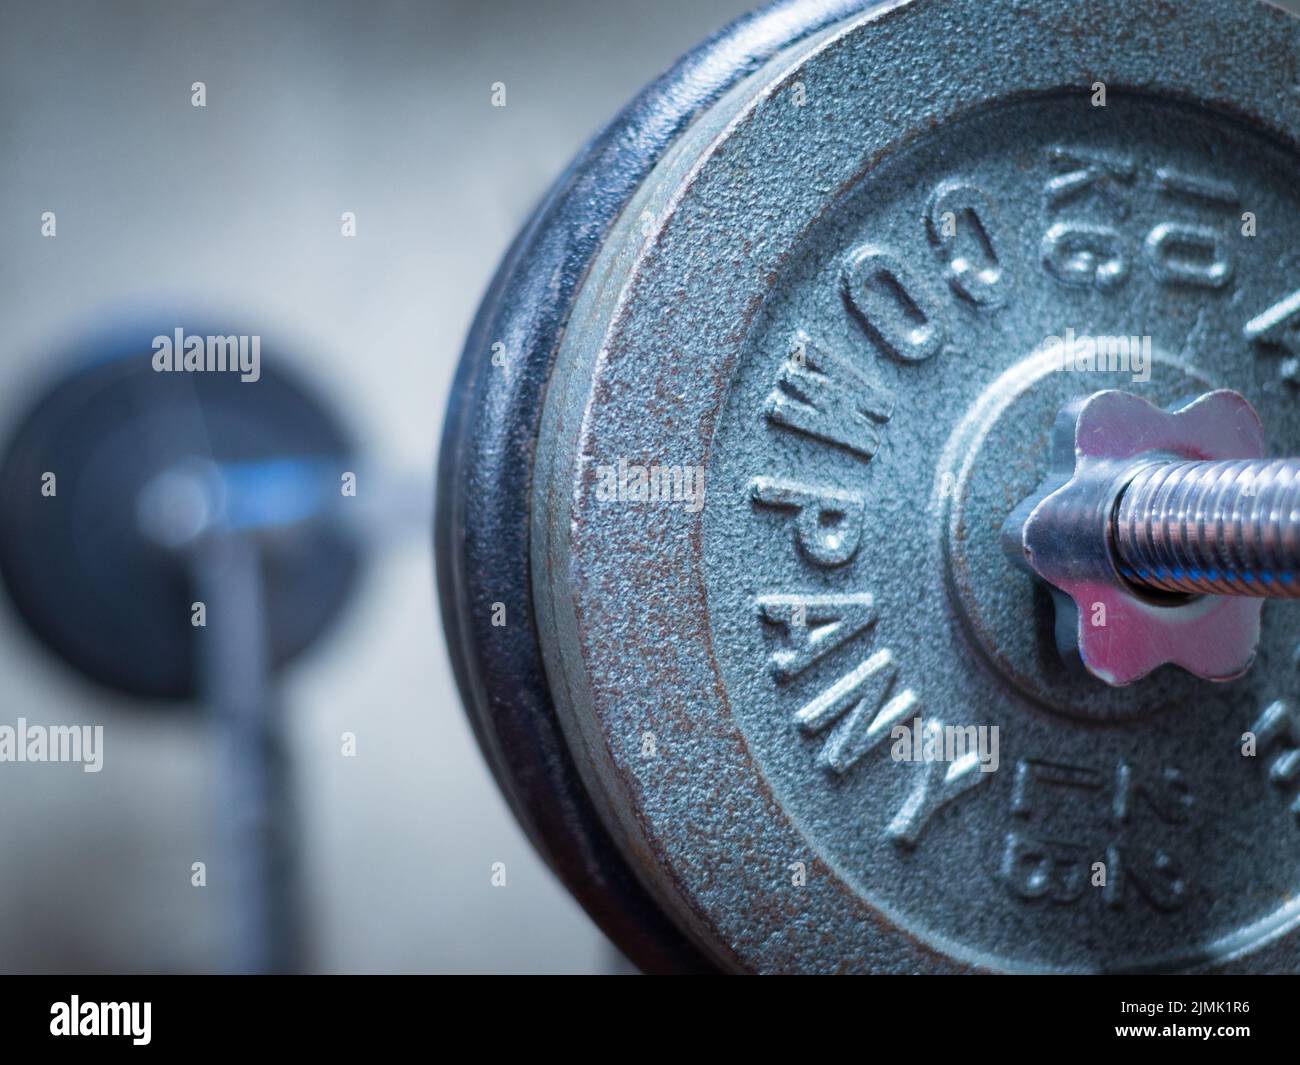 Closeup image of a fitness equipment Stock Photo